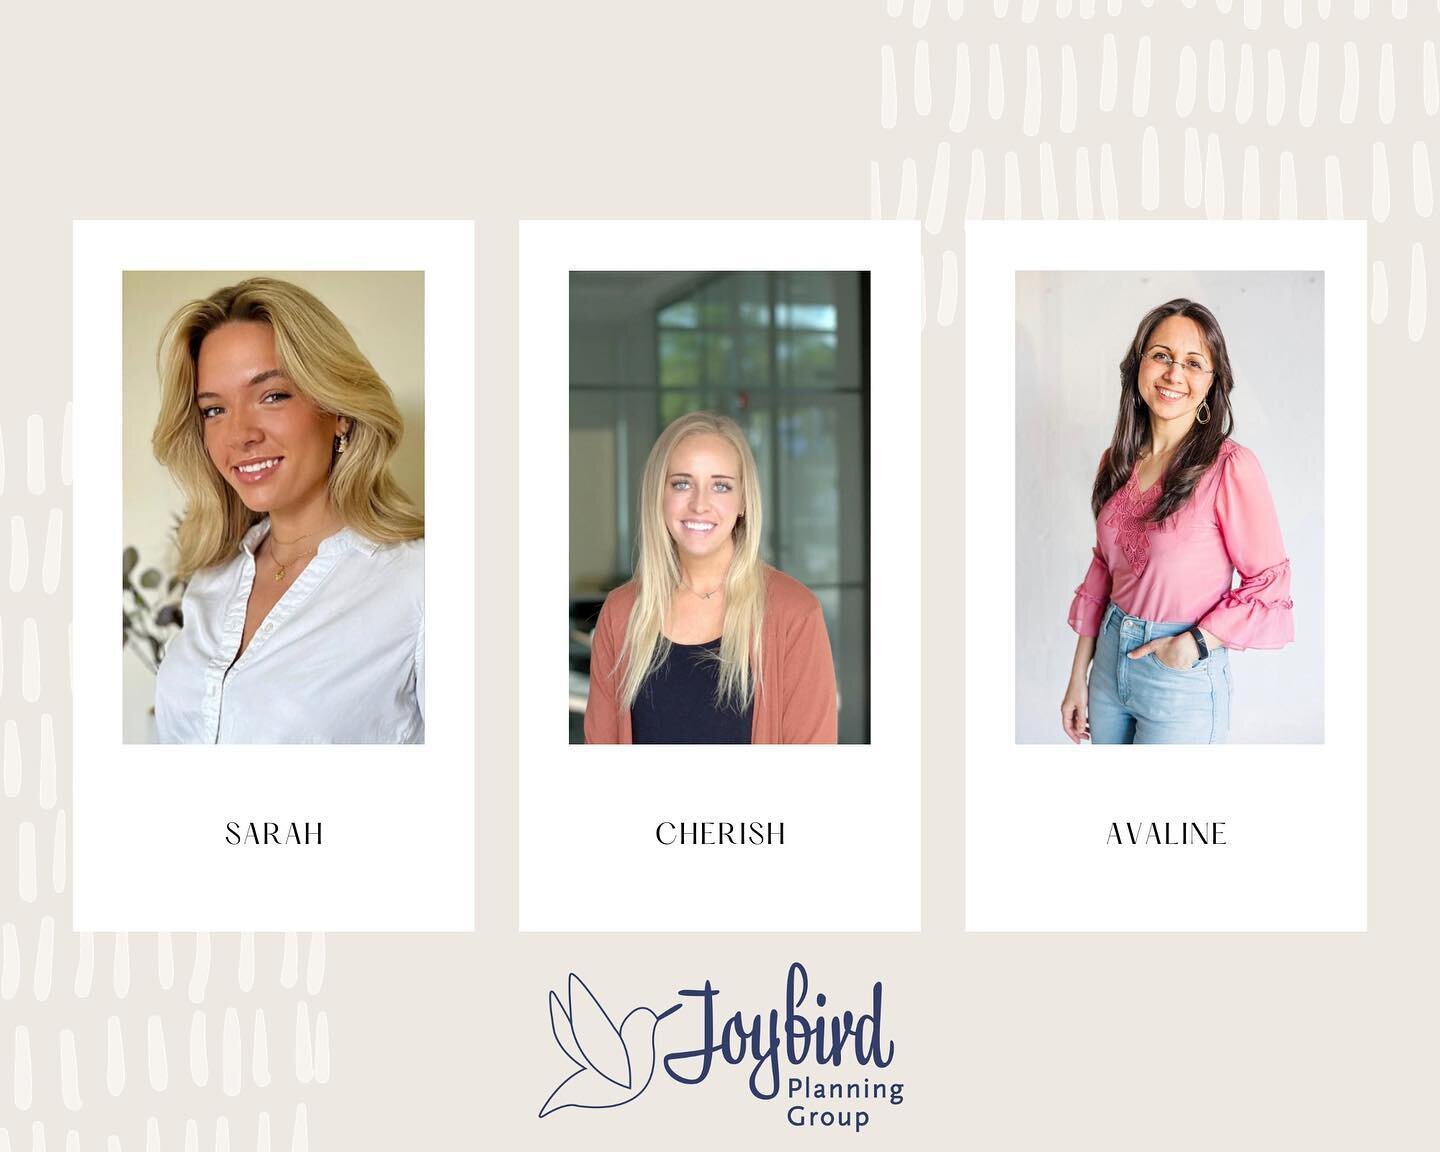 ✨STAFF APPRECIATION POST ✨ 

This past weekend was a &ldquo;3 wedding Saturday&rdquo; for our Joybird team! Our leads @sarahashleyroe @chers869 and Avaline assisted our owner and knocked it out of the park!  Special thanks to our assistants @maddie_w